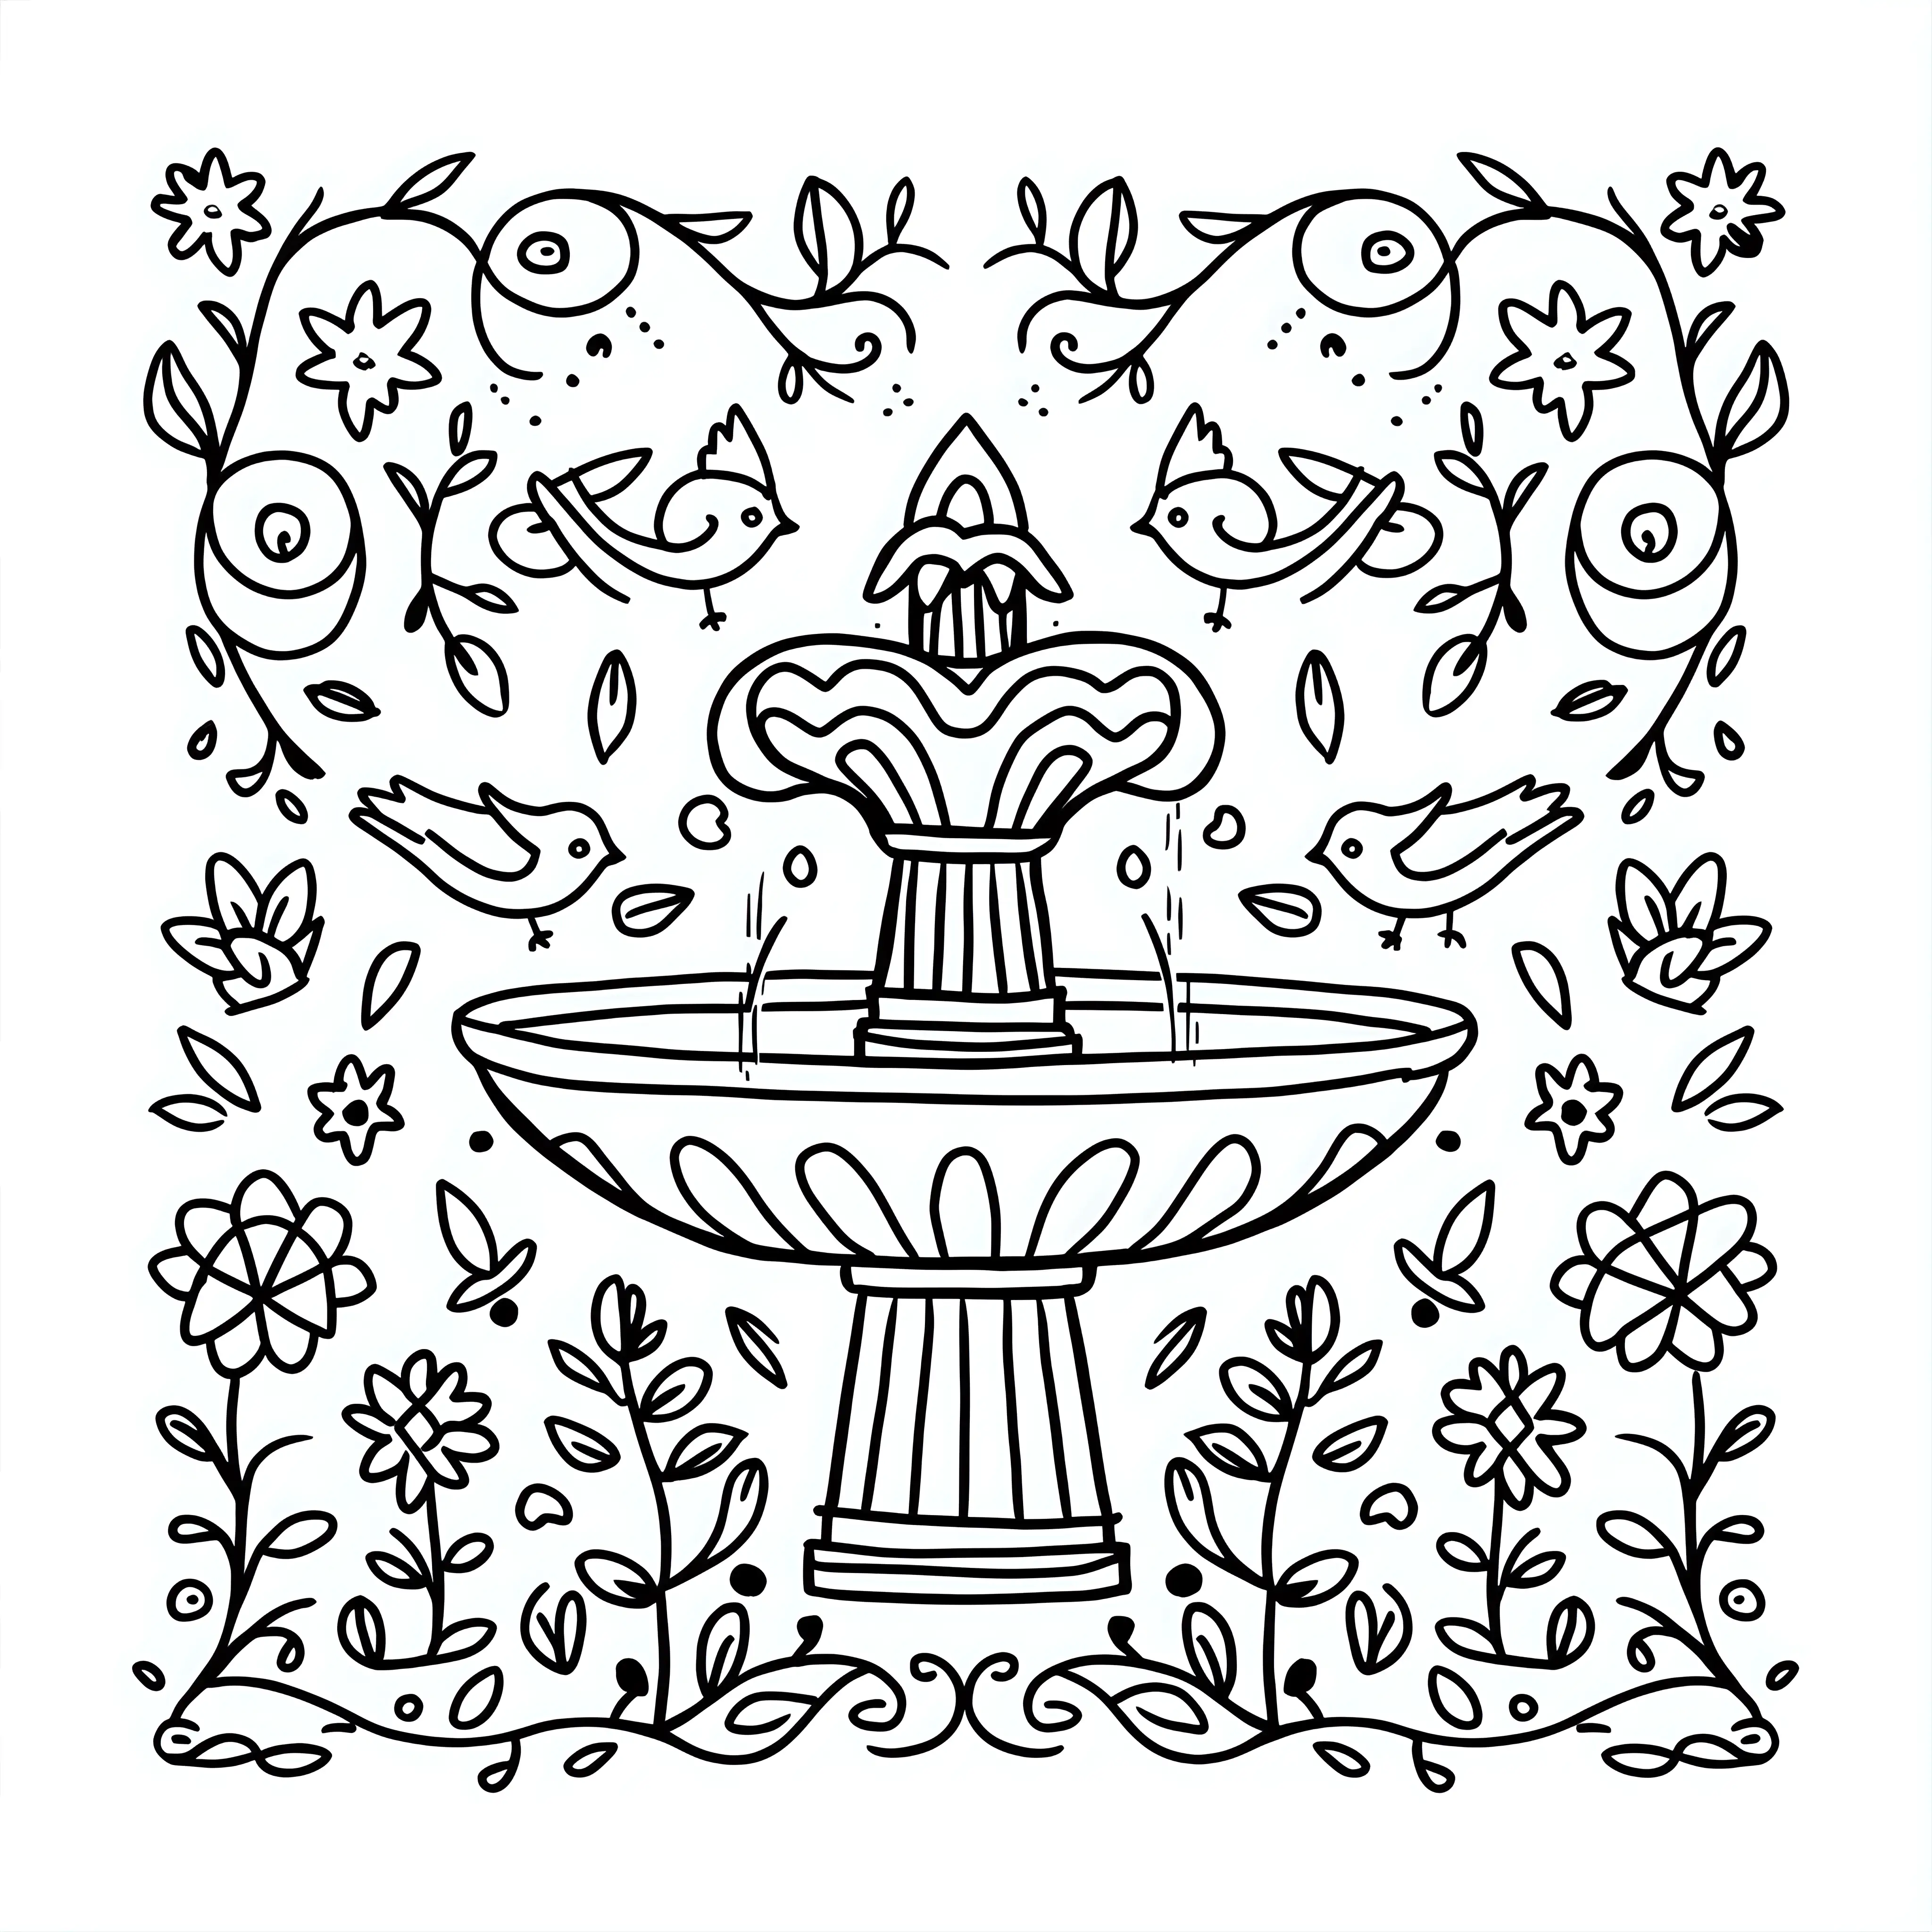 simple cute fountain pattern coloring page. all in black and white. white background. should cover the whole page.